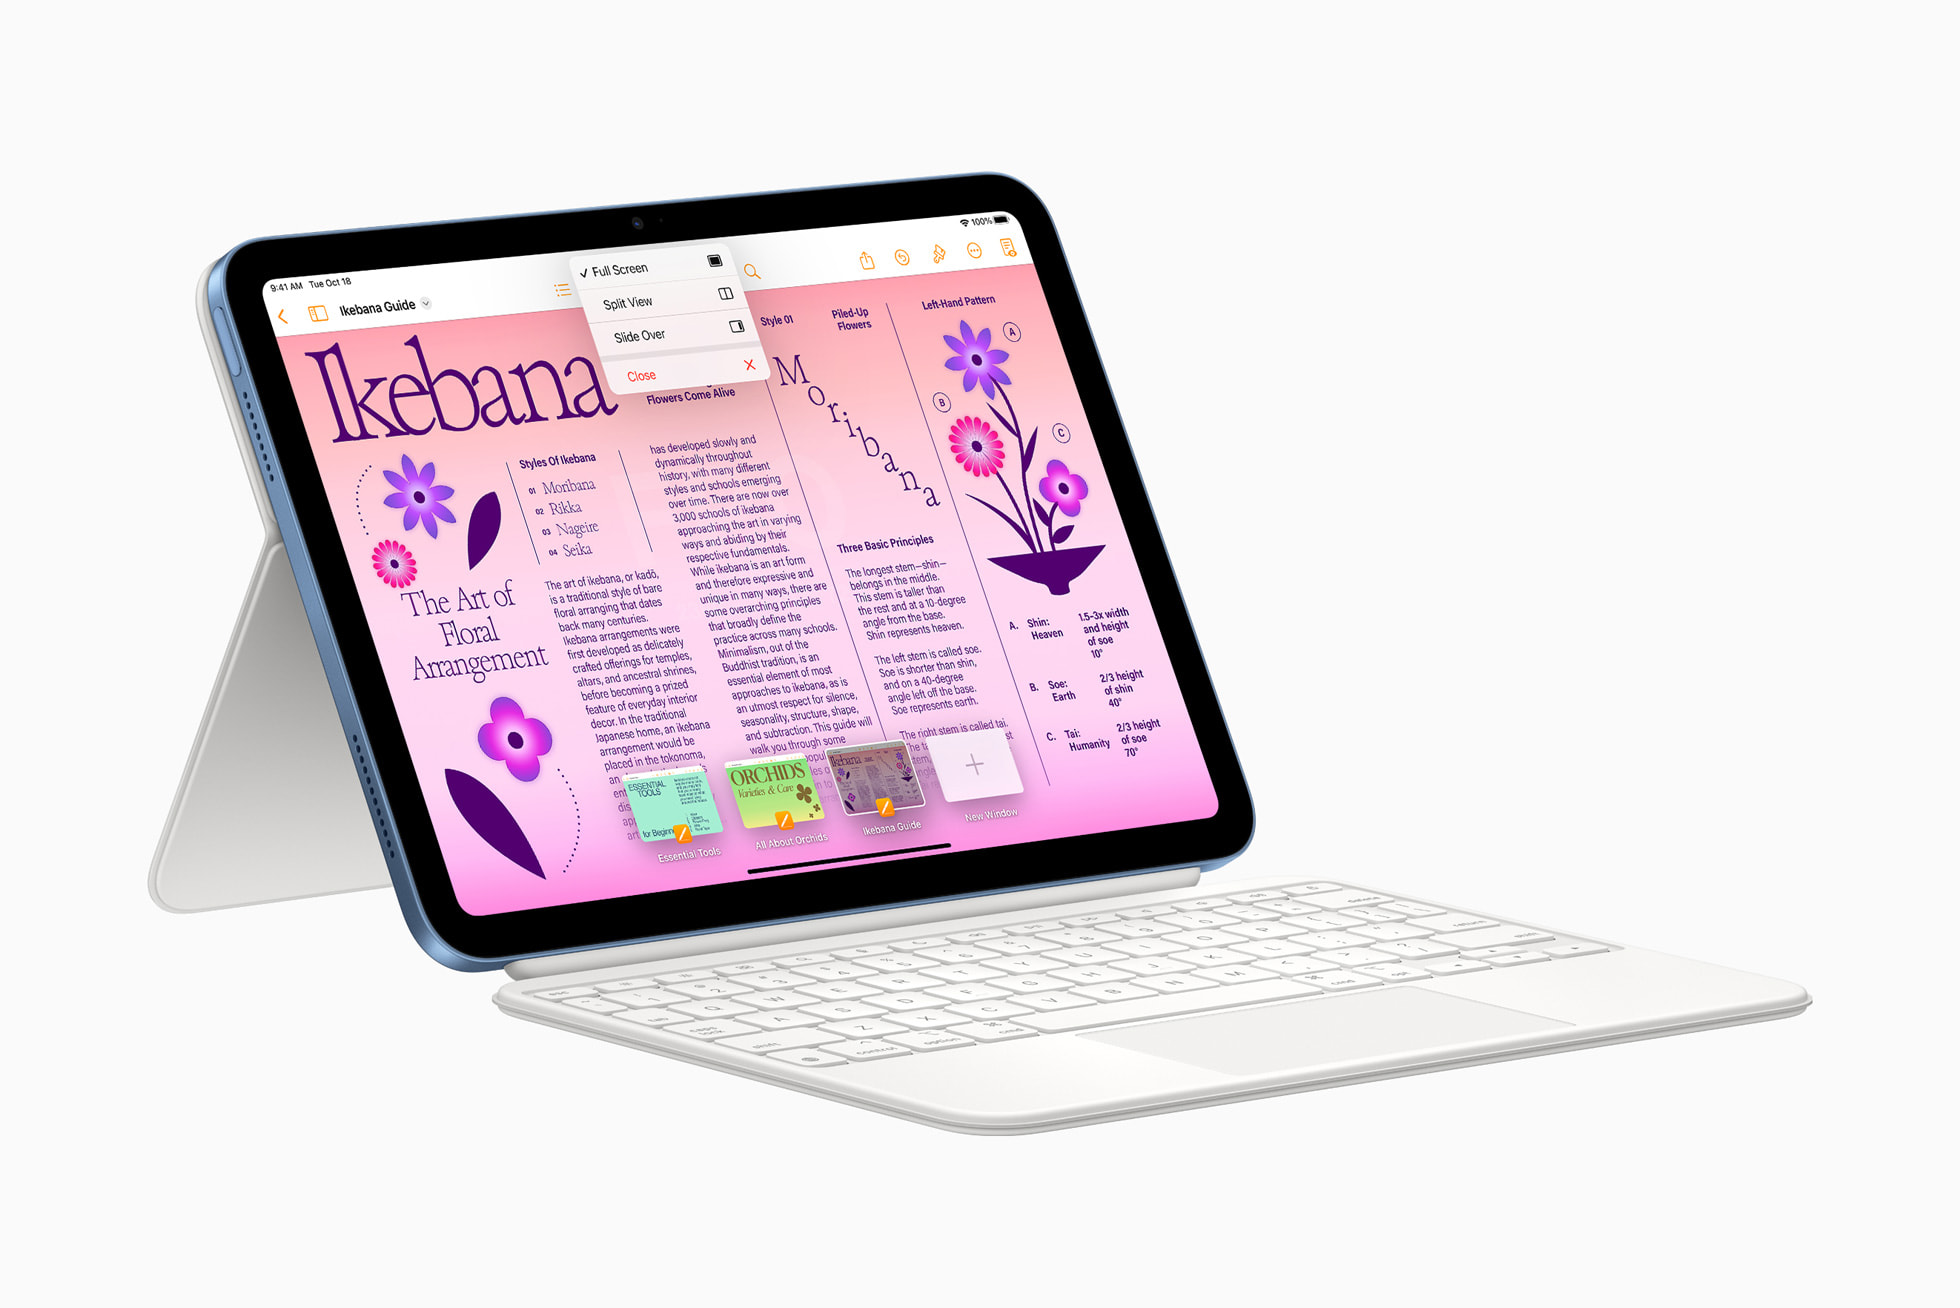 Apple quietly launched a redesigned iPad and the M2 iPad Pros